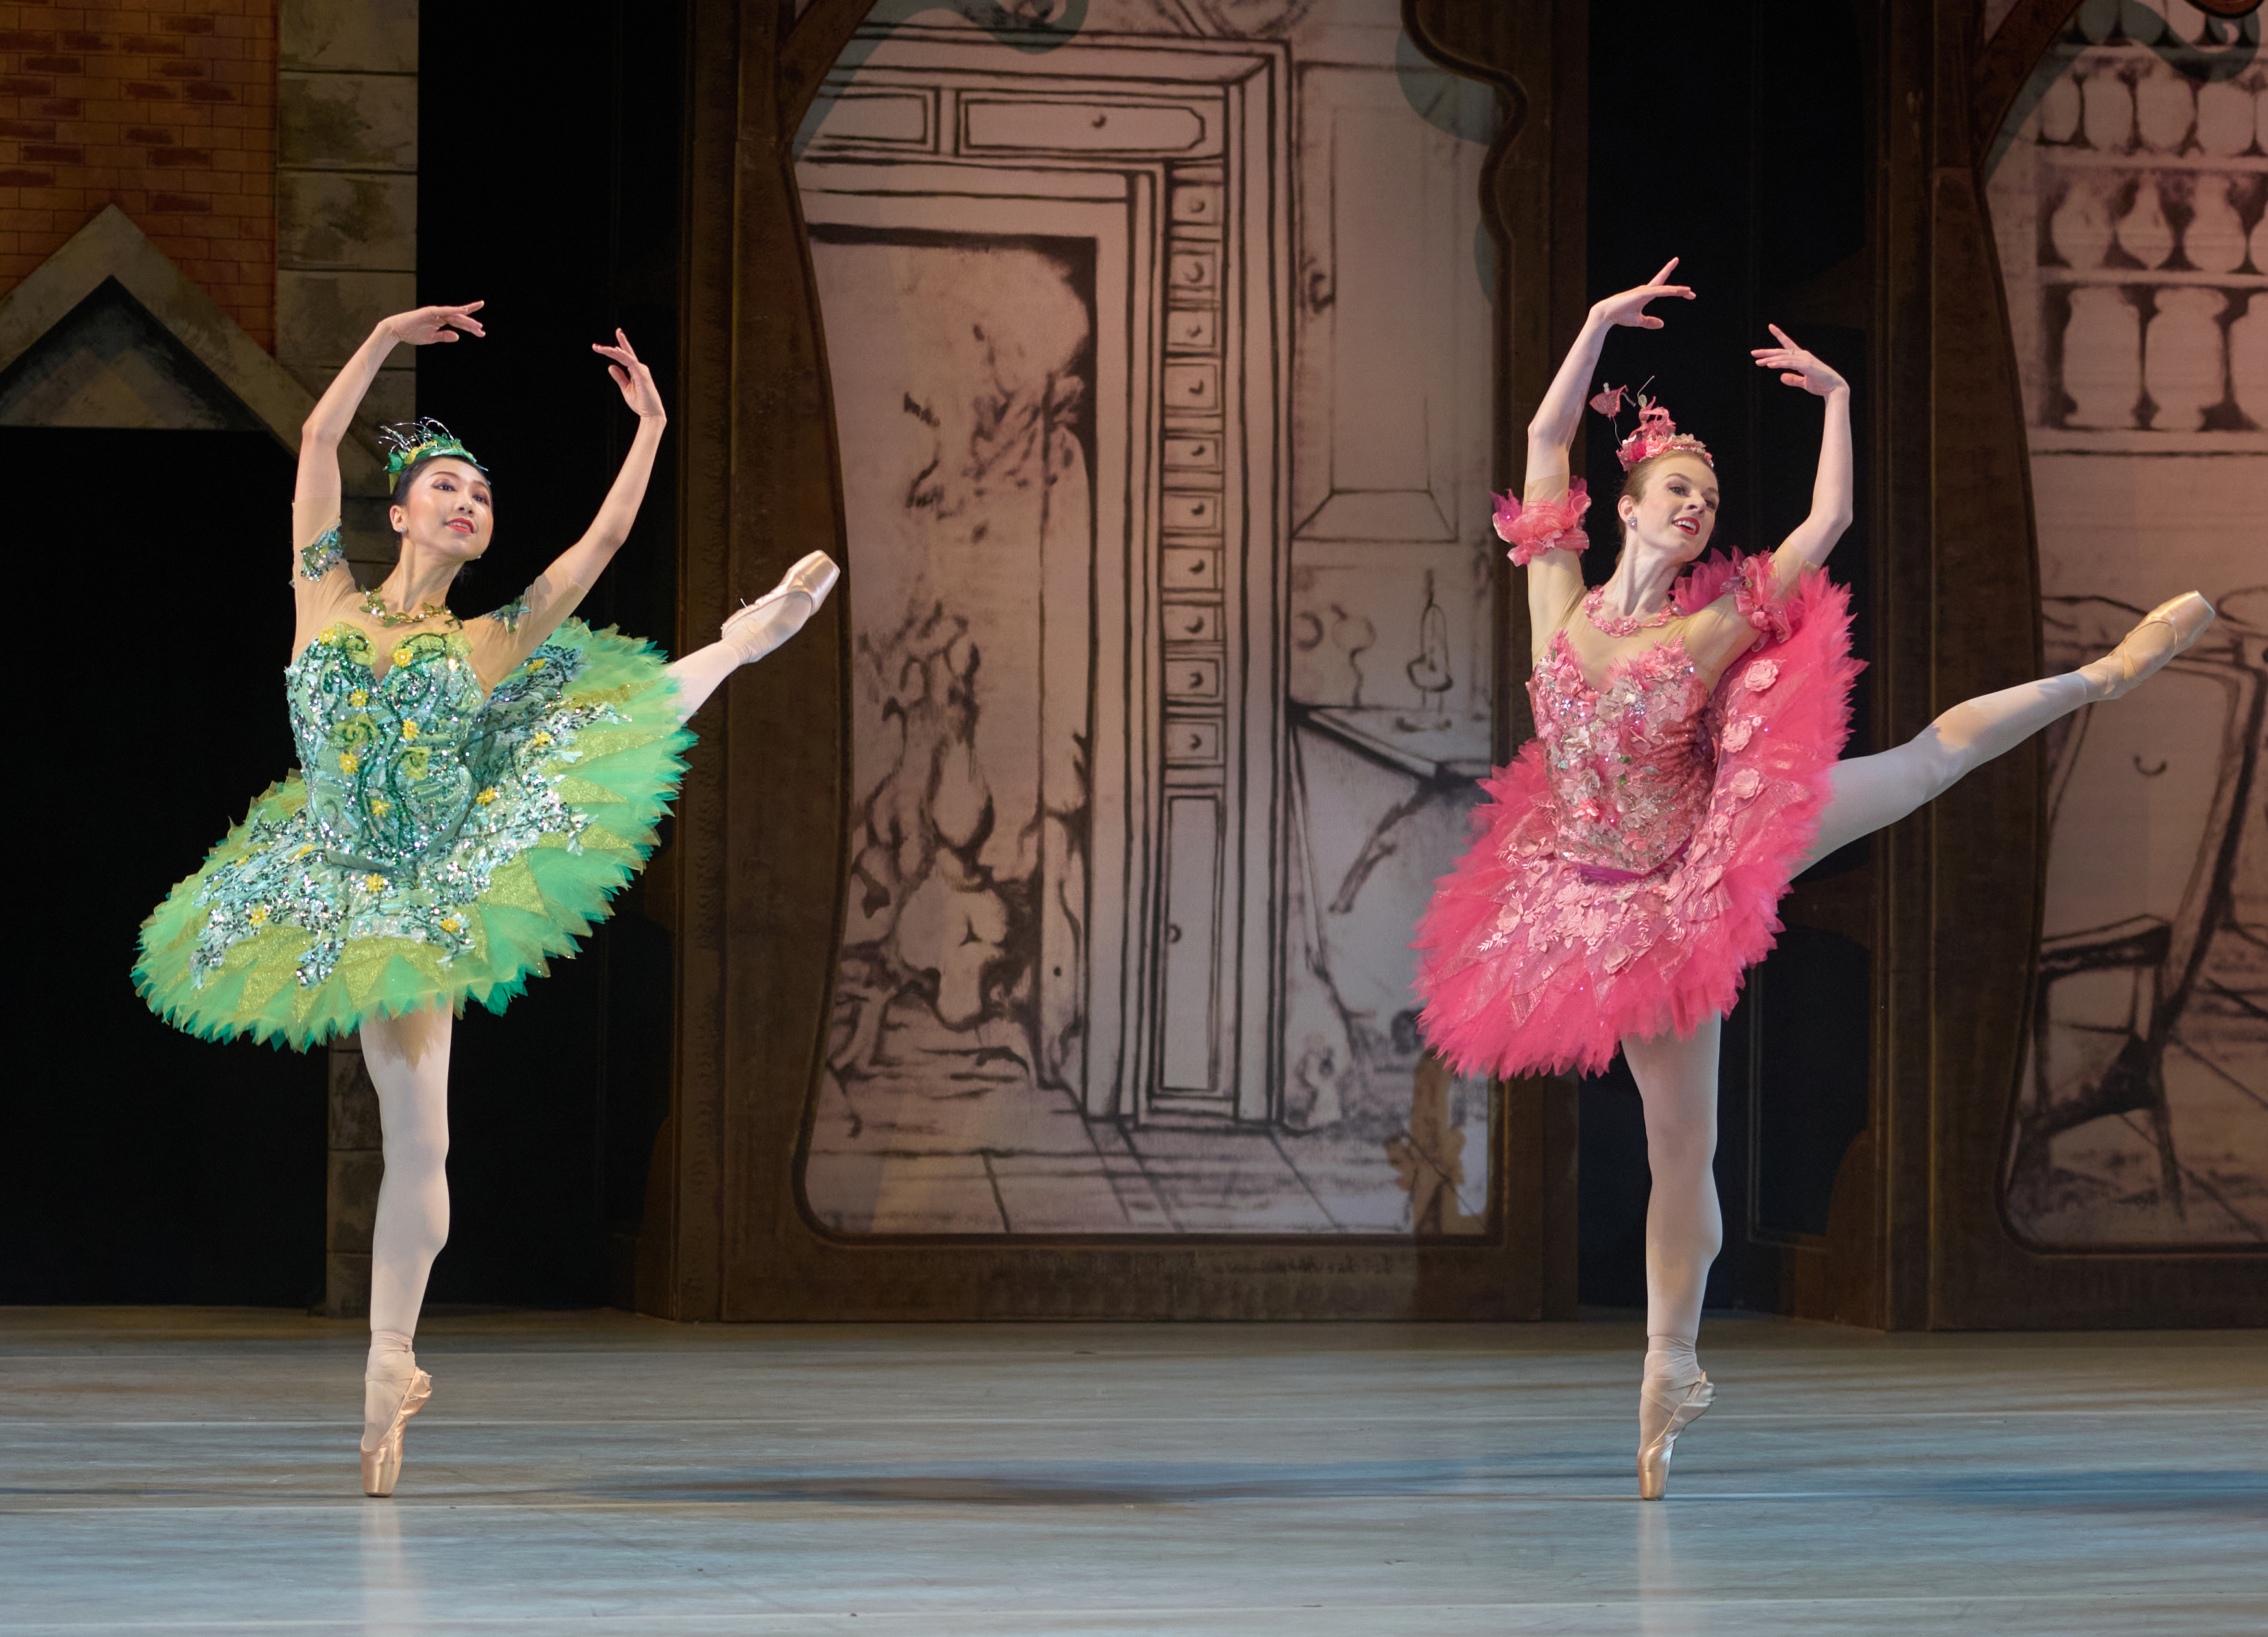 Cinderella_Dancers (from left) Gao Ge, Jessica Burrows_Photography_Conrad Dy-Liacco (4).jpg